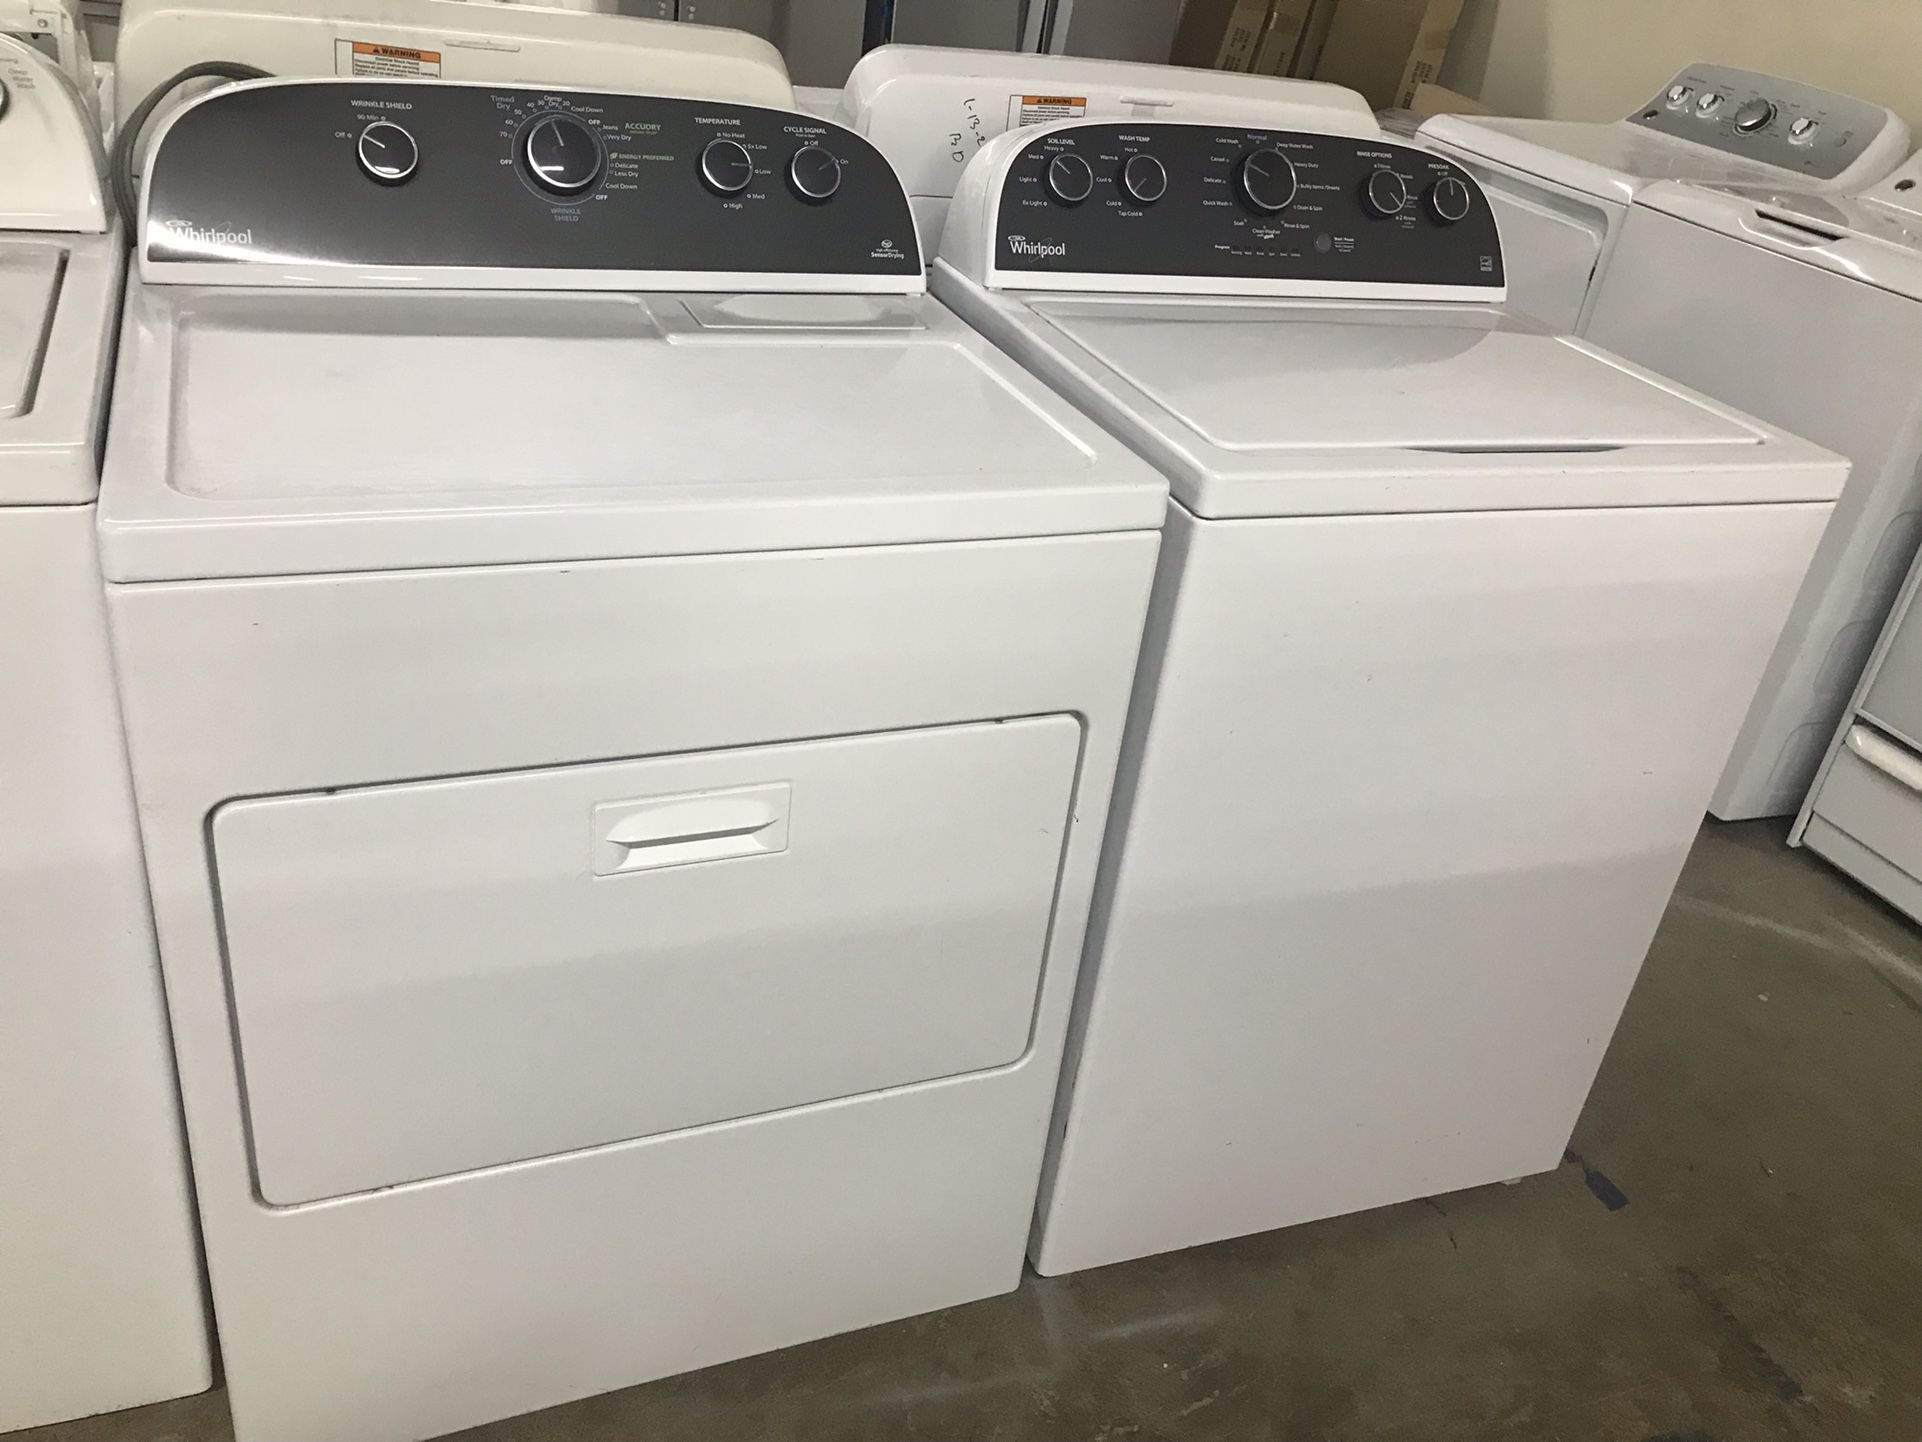 Whirlpool Washer And Dryer Set!!